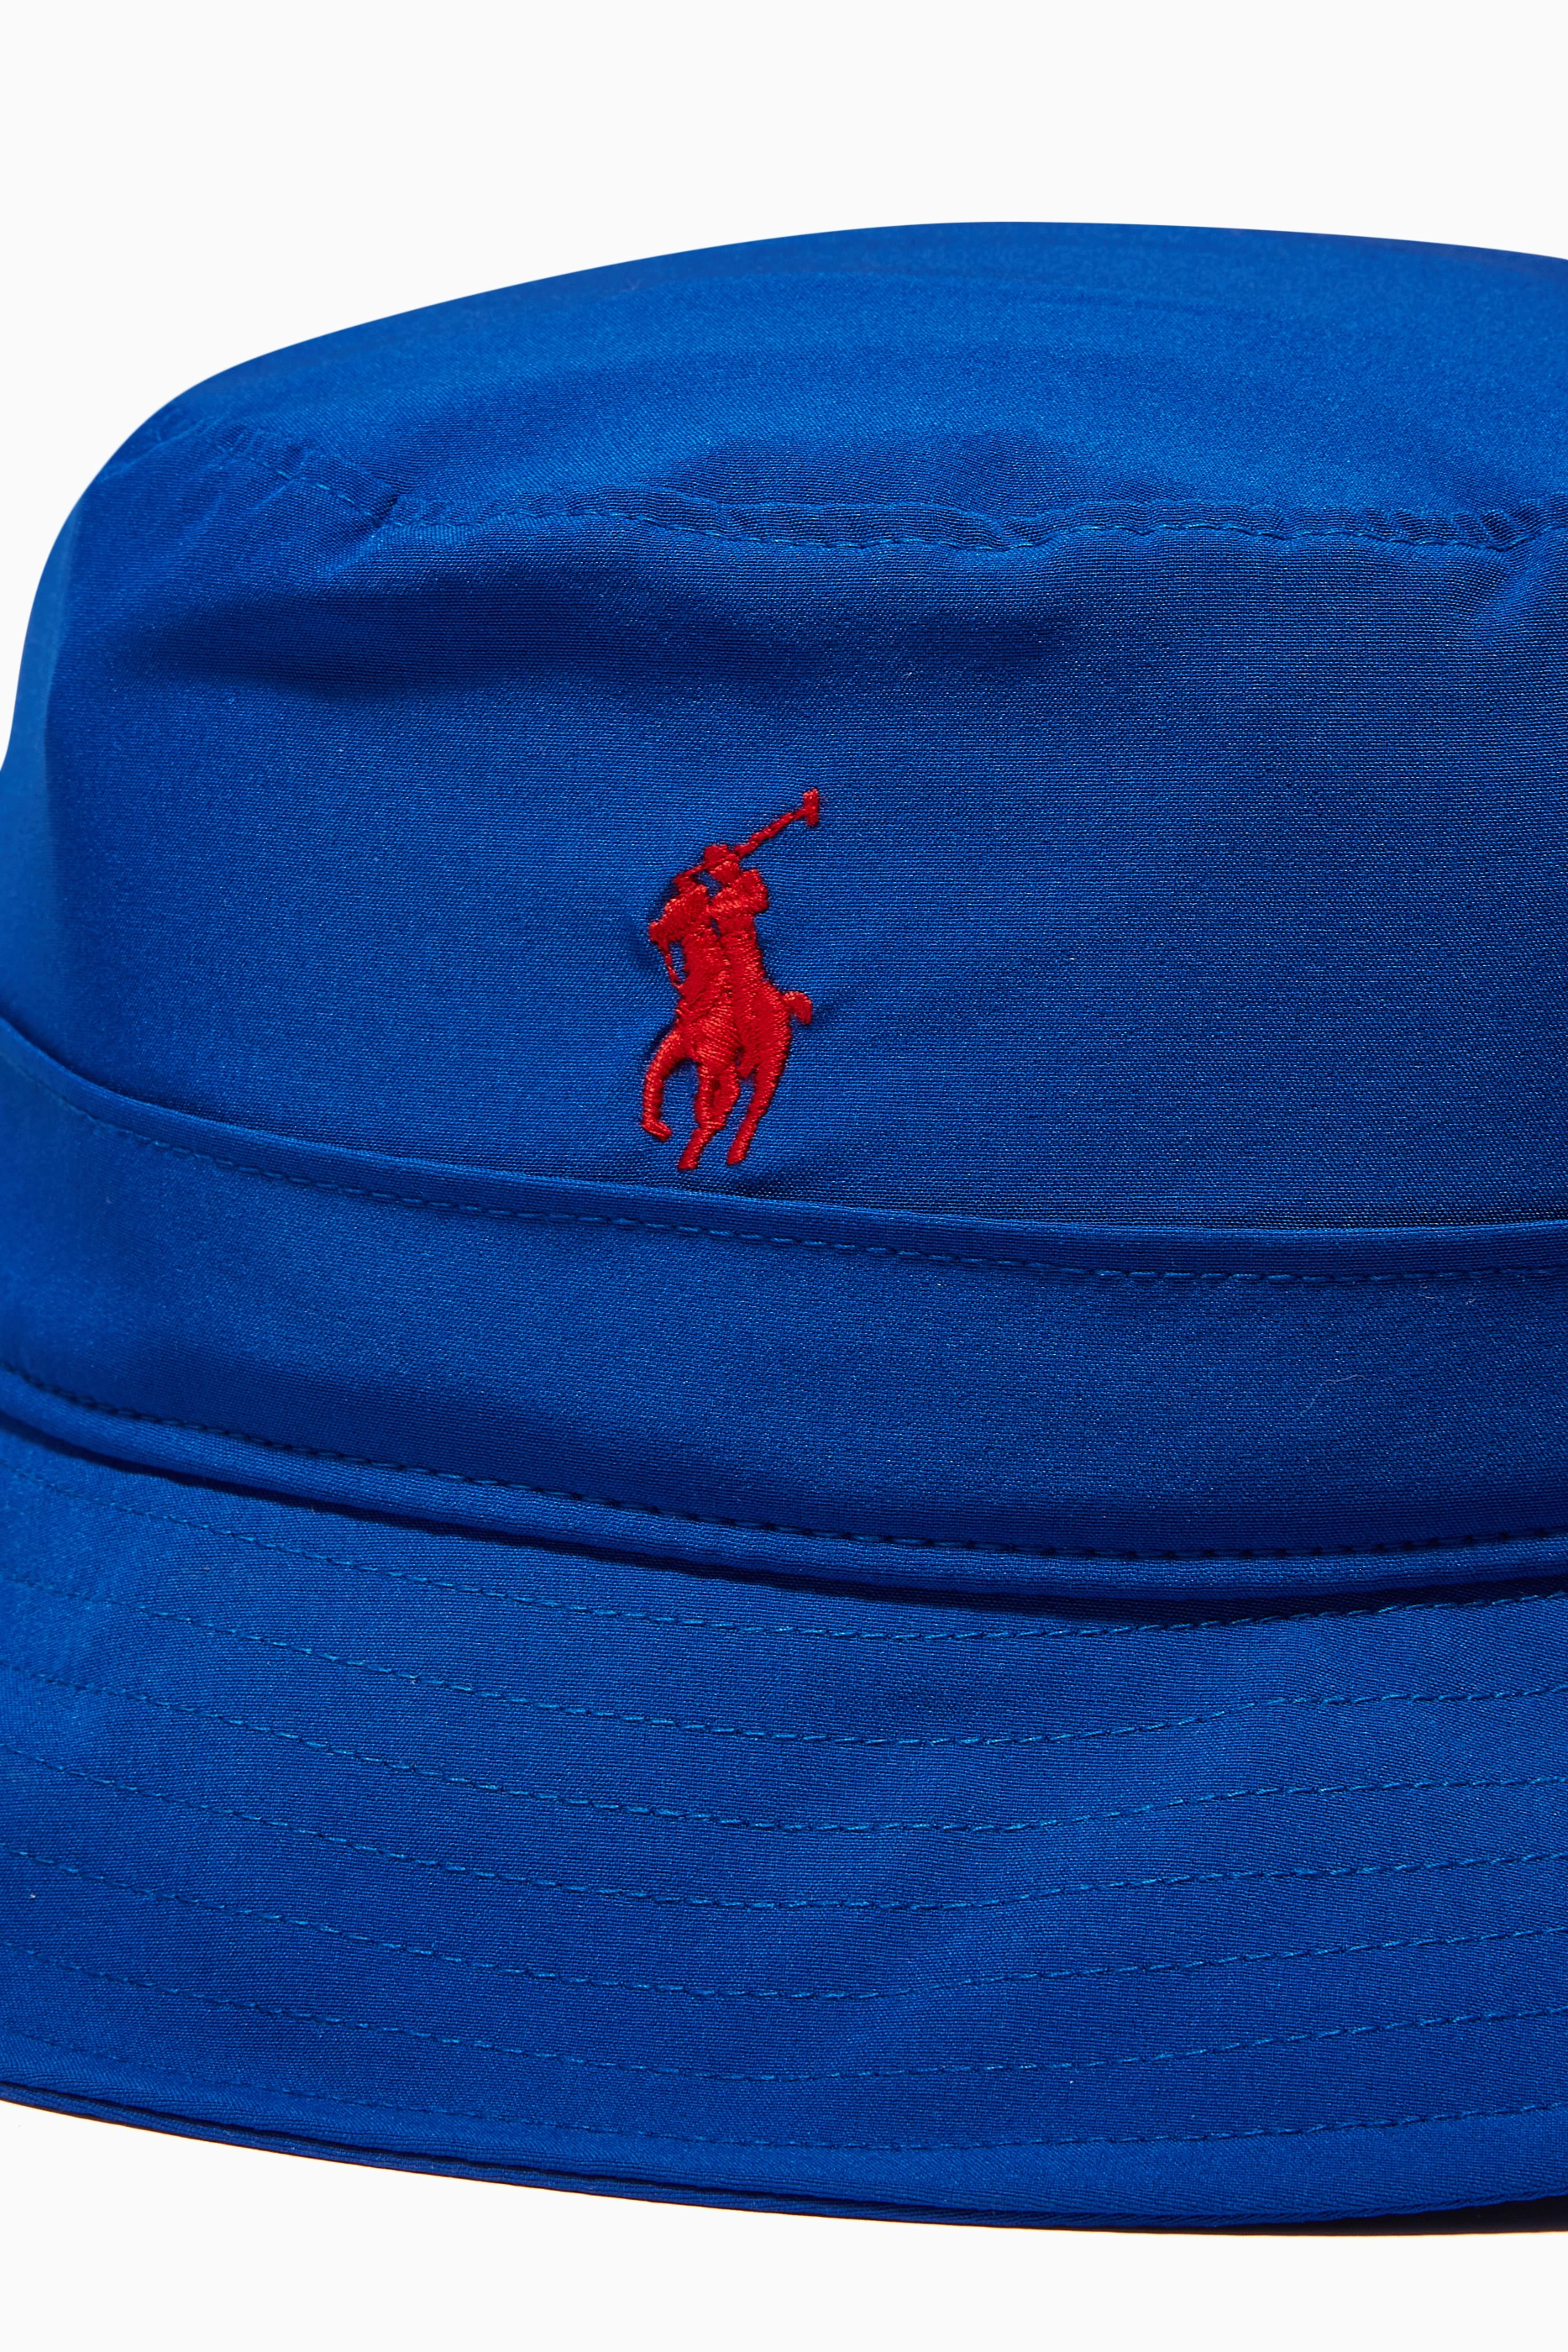 POLO RALPH LAUREN Packable Bucket Hat Blue Newport Navy with Red Pony (as1,  Alpha, s, m) at  Women's Clothing store